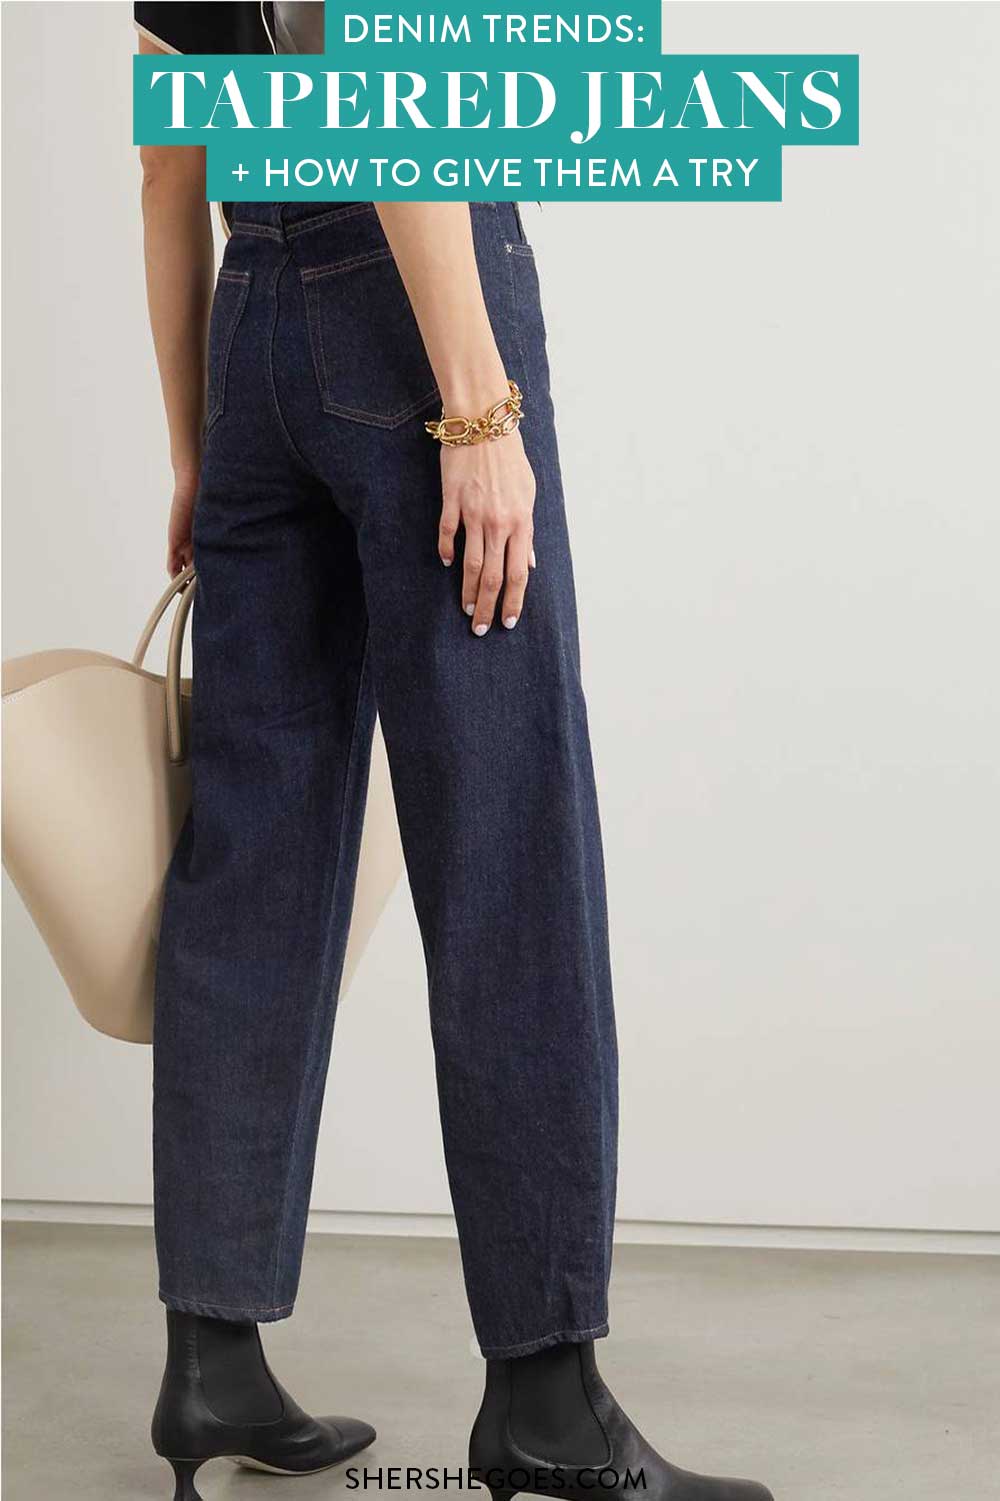 Versterker Socialisme Turbulentie Balloon Jeans: The Fun New Jean Style You Should Try! (2021)